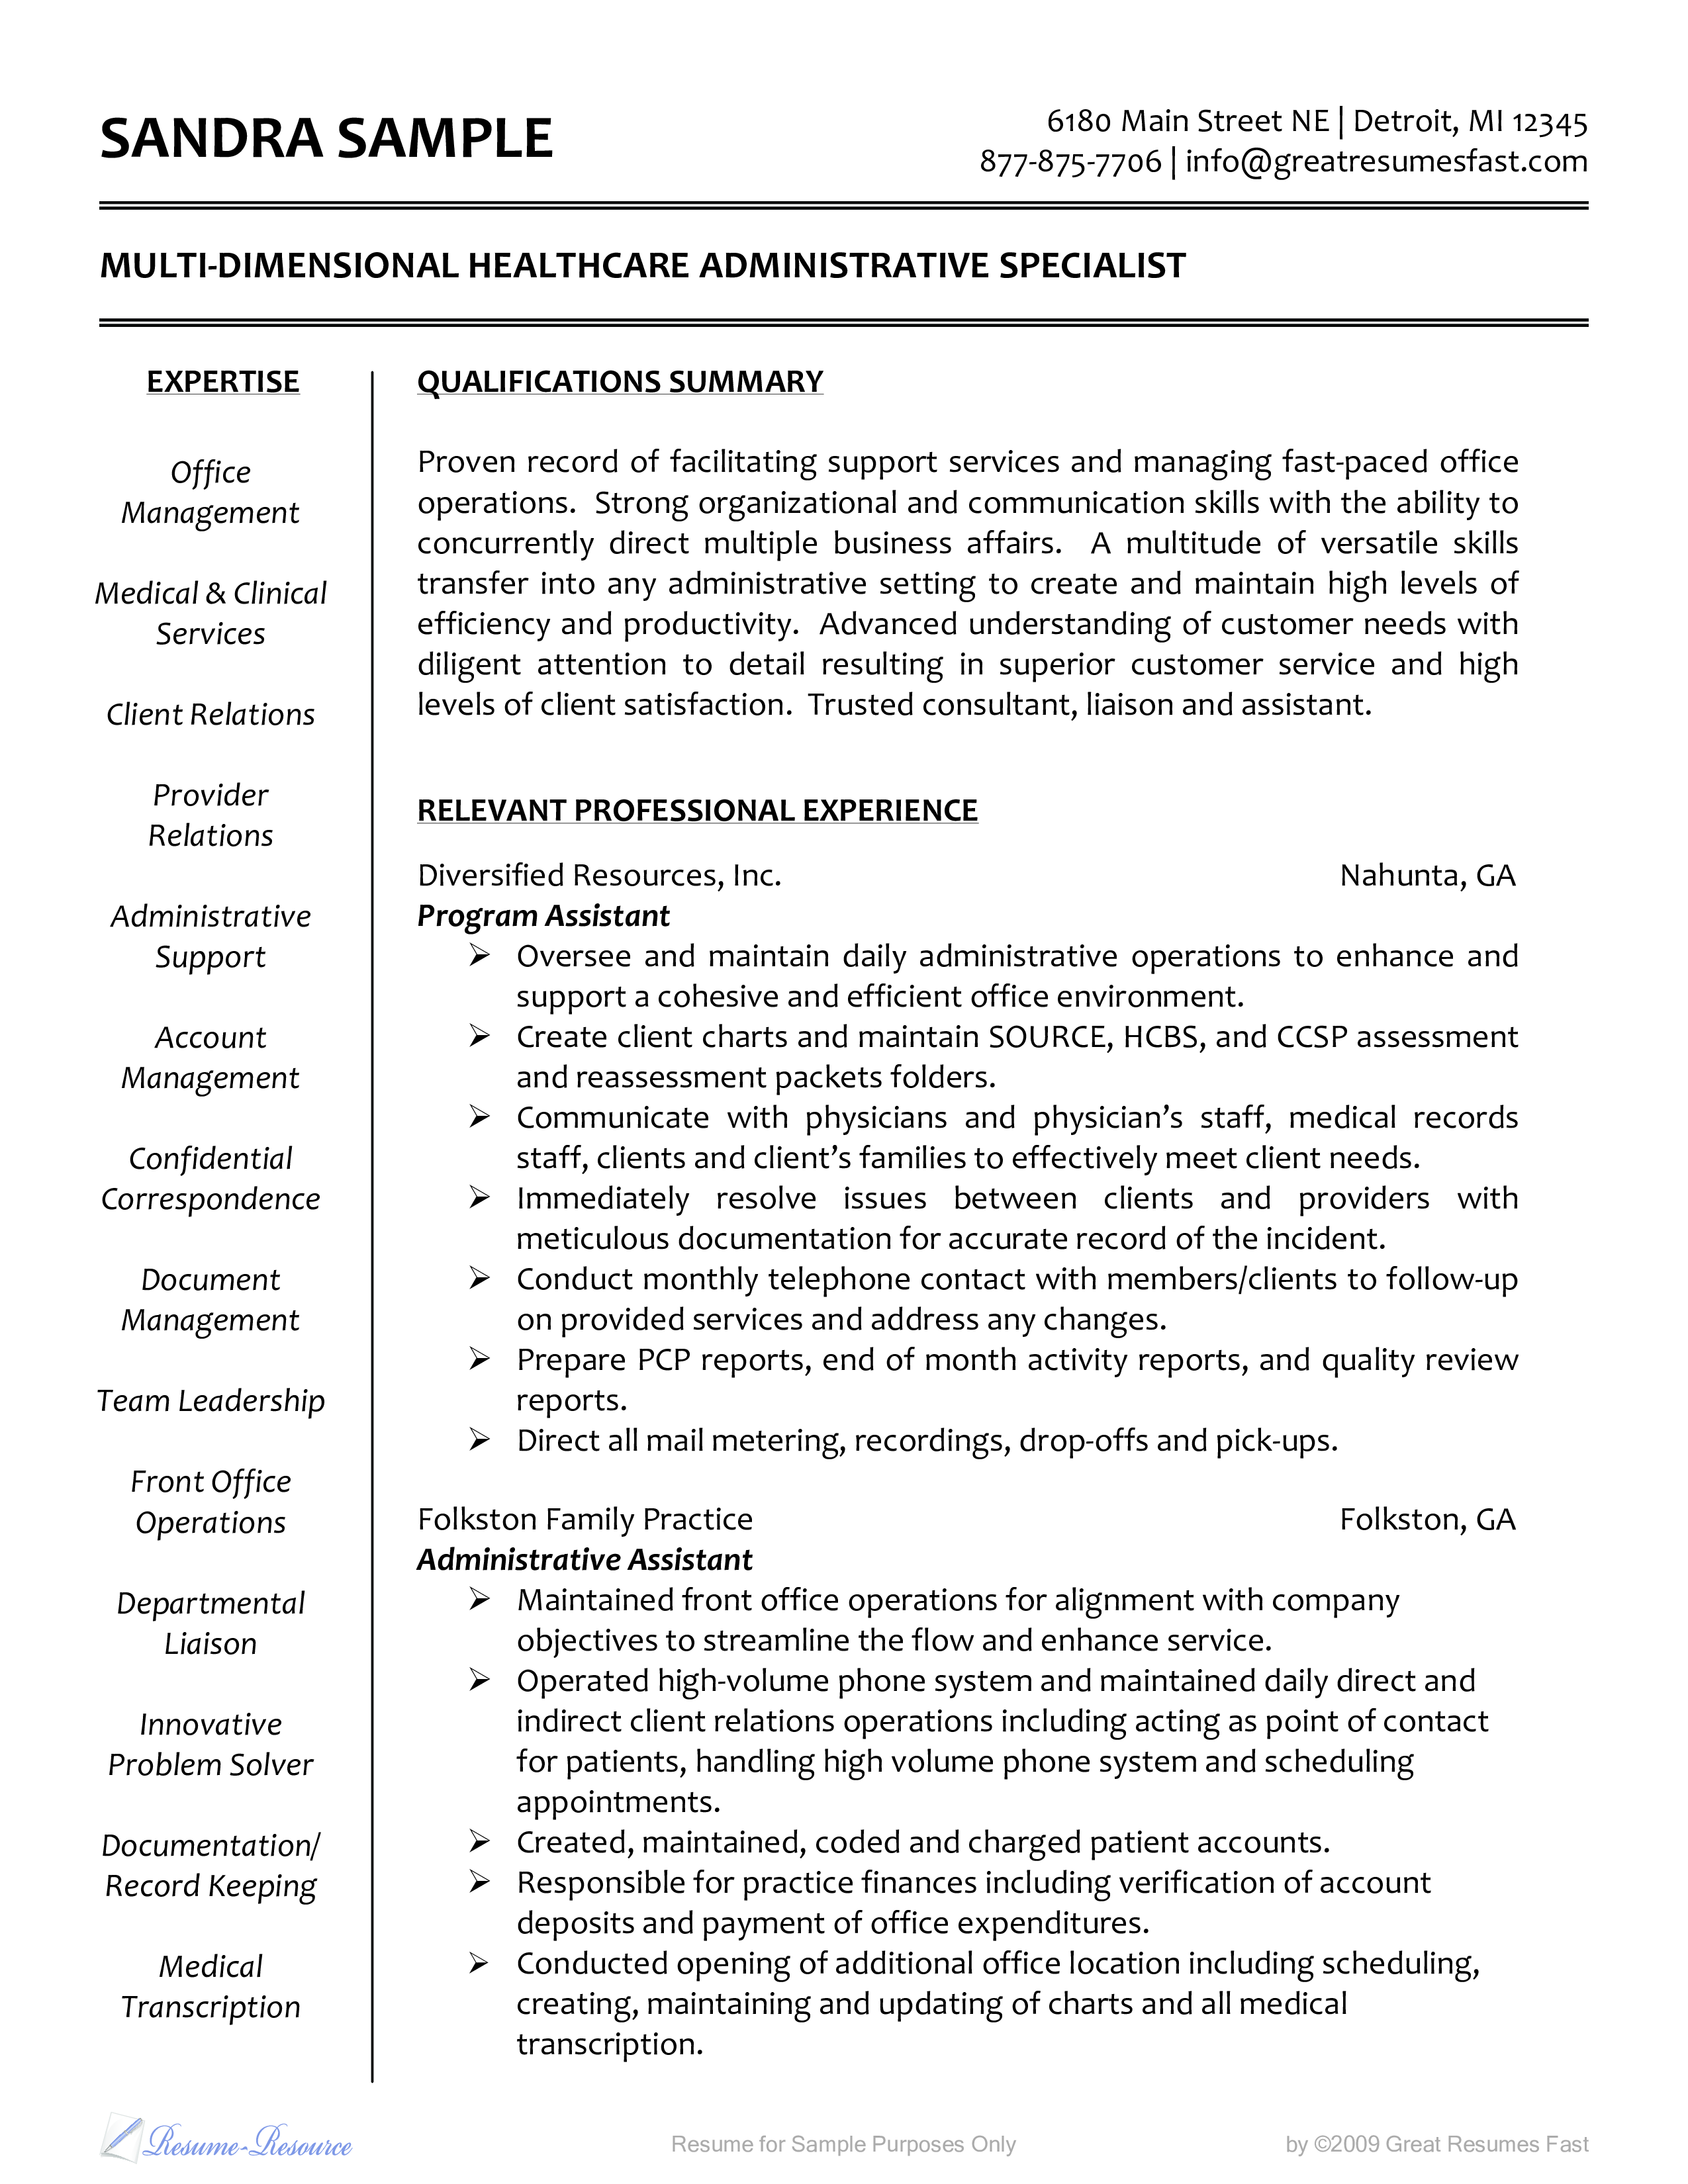 Healthcare Administrative Resume Sample Templates at